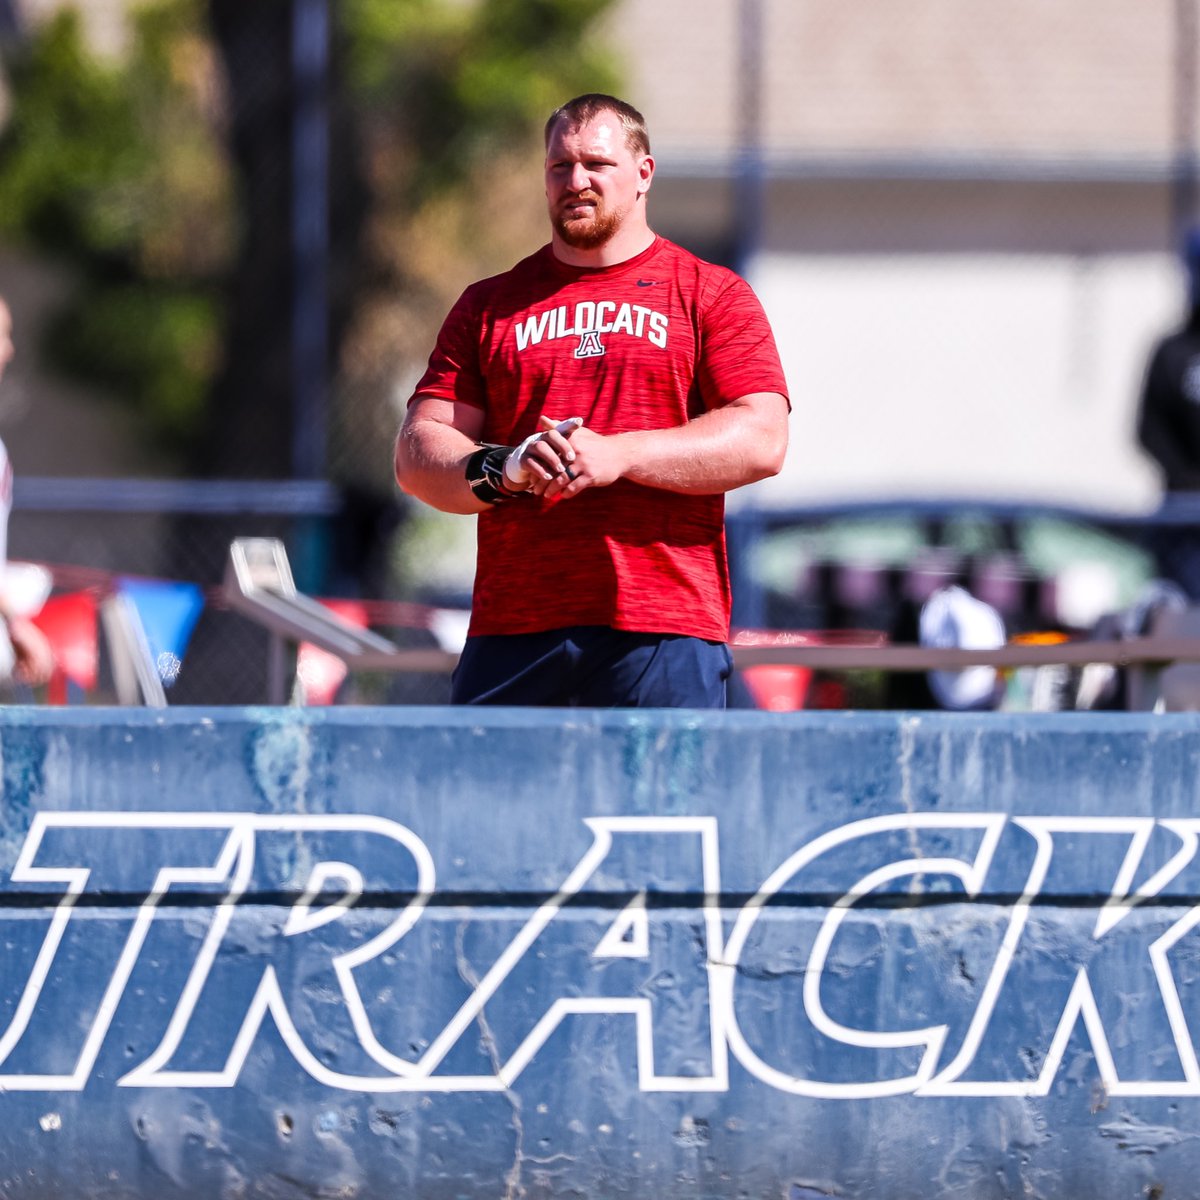 𝐔𝐒𝐀𝐓𝐅 𝐓𝐇𝐑𝐎𝐖𝐒 𝐅𝐄𝐒𝐓𝐈𝐕𝐀𝐋

Former Wildcat Jordan Geist finishes fourth in the shot put and fifth in the hammer at the USATF Throws Festival! 

Both marks hit the US Olympic Trials qualifying standards!

SP 69-8 (21.23m)
HT 244-8 (74.58m)

#BearDown | #BeLezoLike